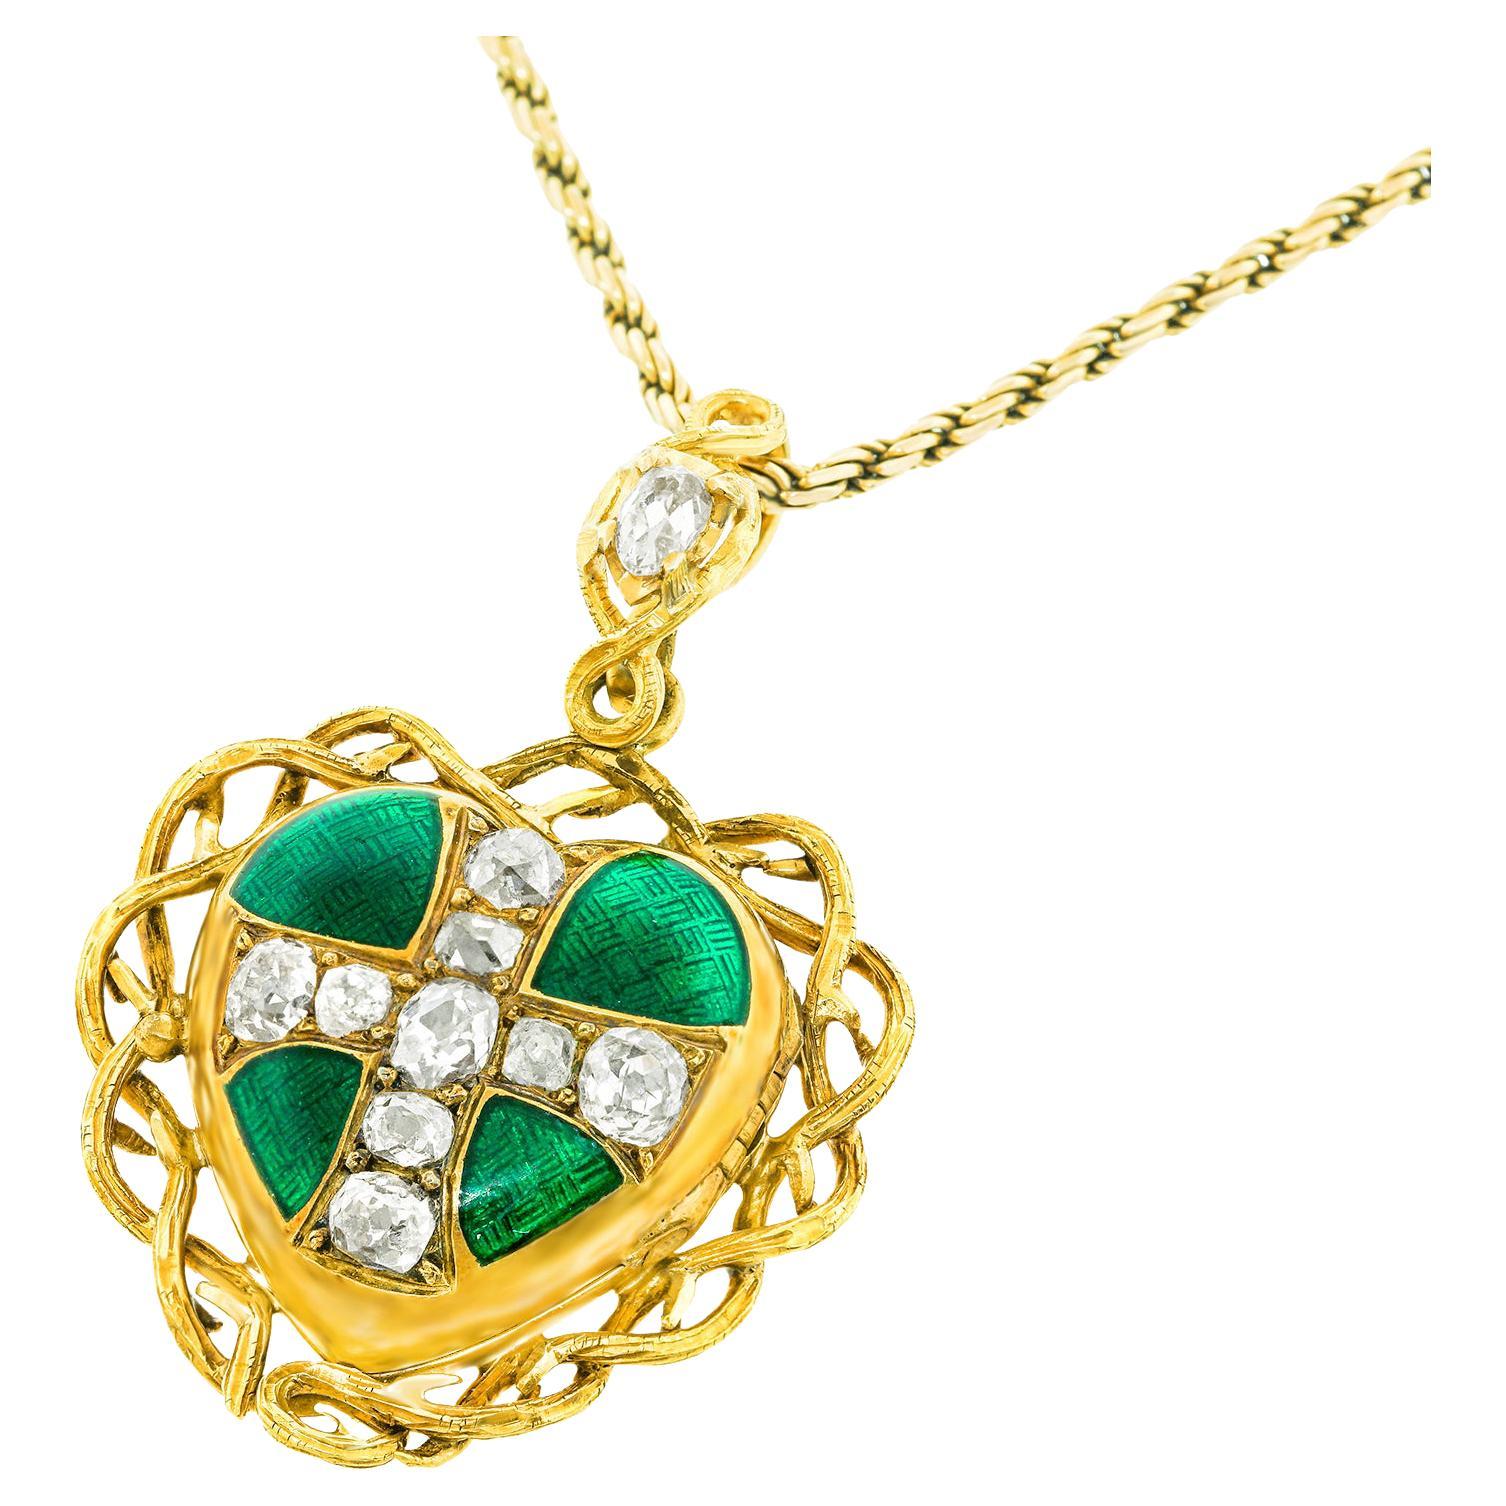 Gothic Revival Diamond and Enamel Gold Heart Pendant, French, 1870